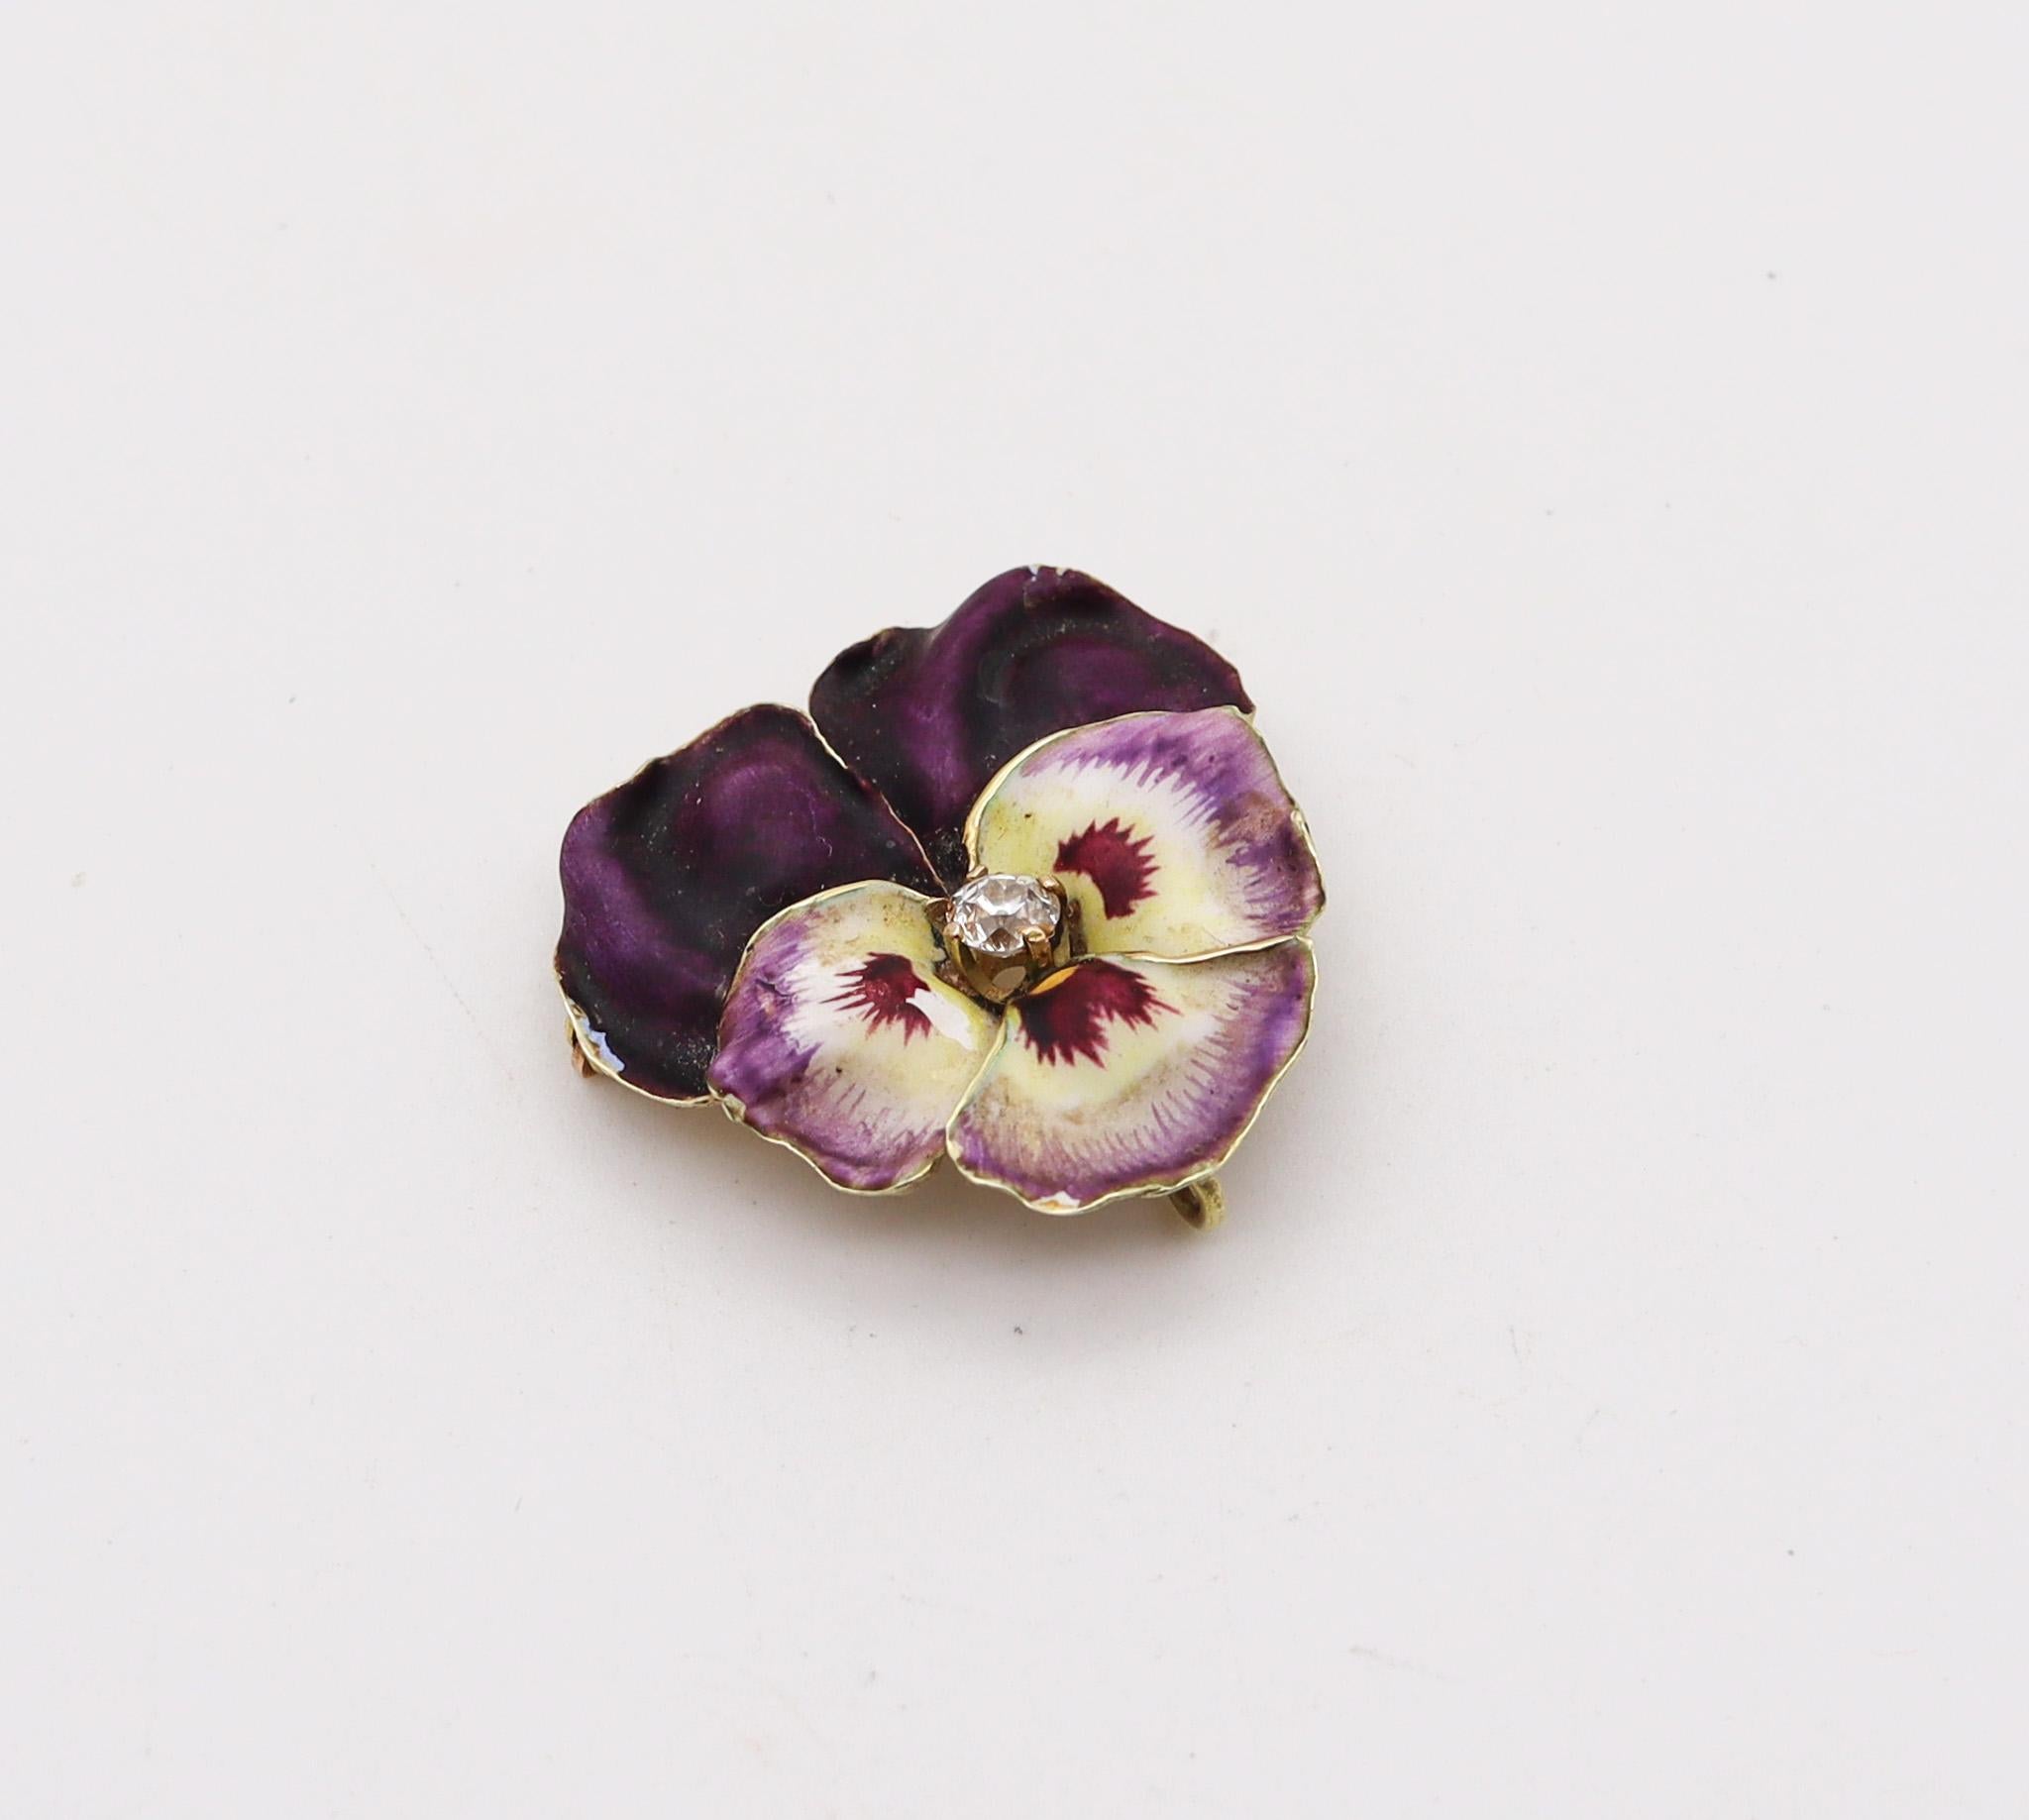 Art nouveau Pansy flower pendant brooch designed by A.J. Hedge & Co.

A colorful pendant-brooch, created in America during the Edwardian and the Art Nouveau periods, back in the 1900. This piece is very unique and has been carefully crafted by A.J.